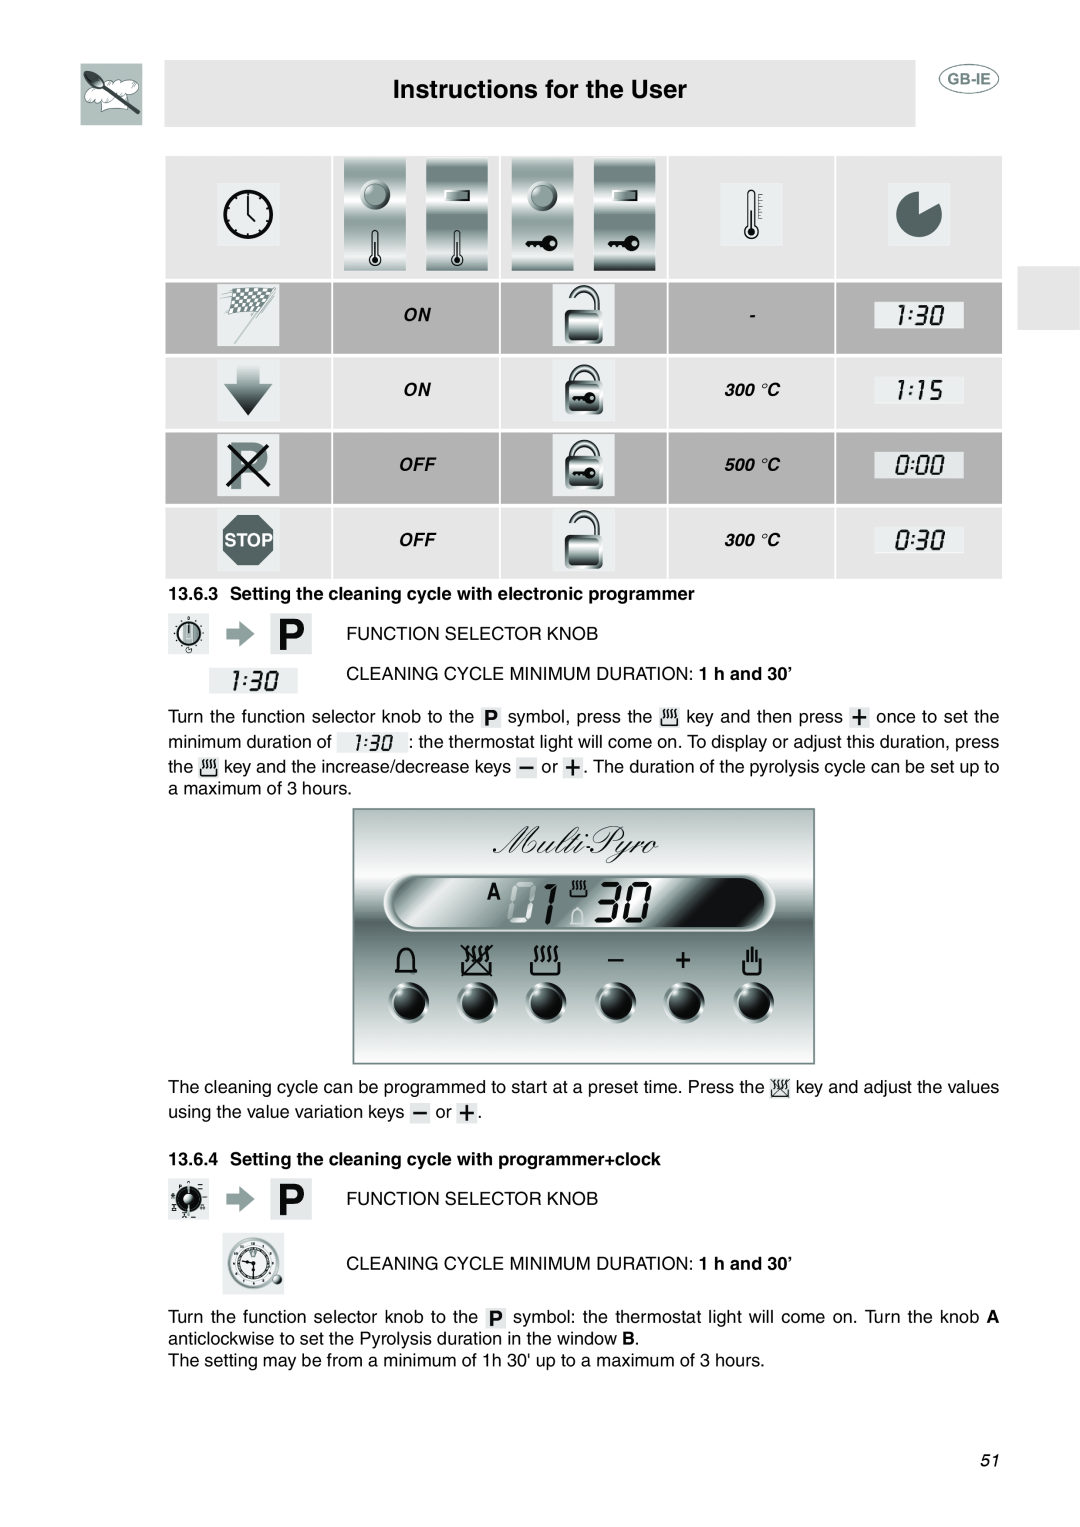 Smeg FP133X, FP132X manual Instructions for the User, Setting the cleaning cycle with electronic programmer 